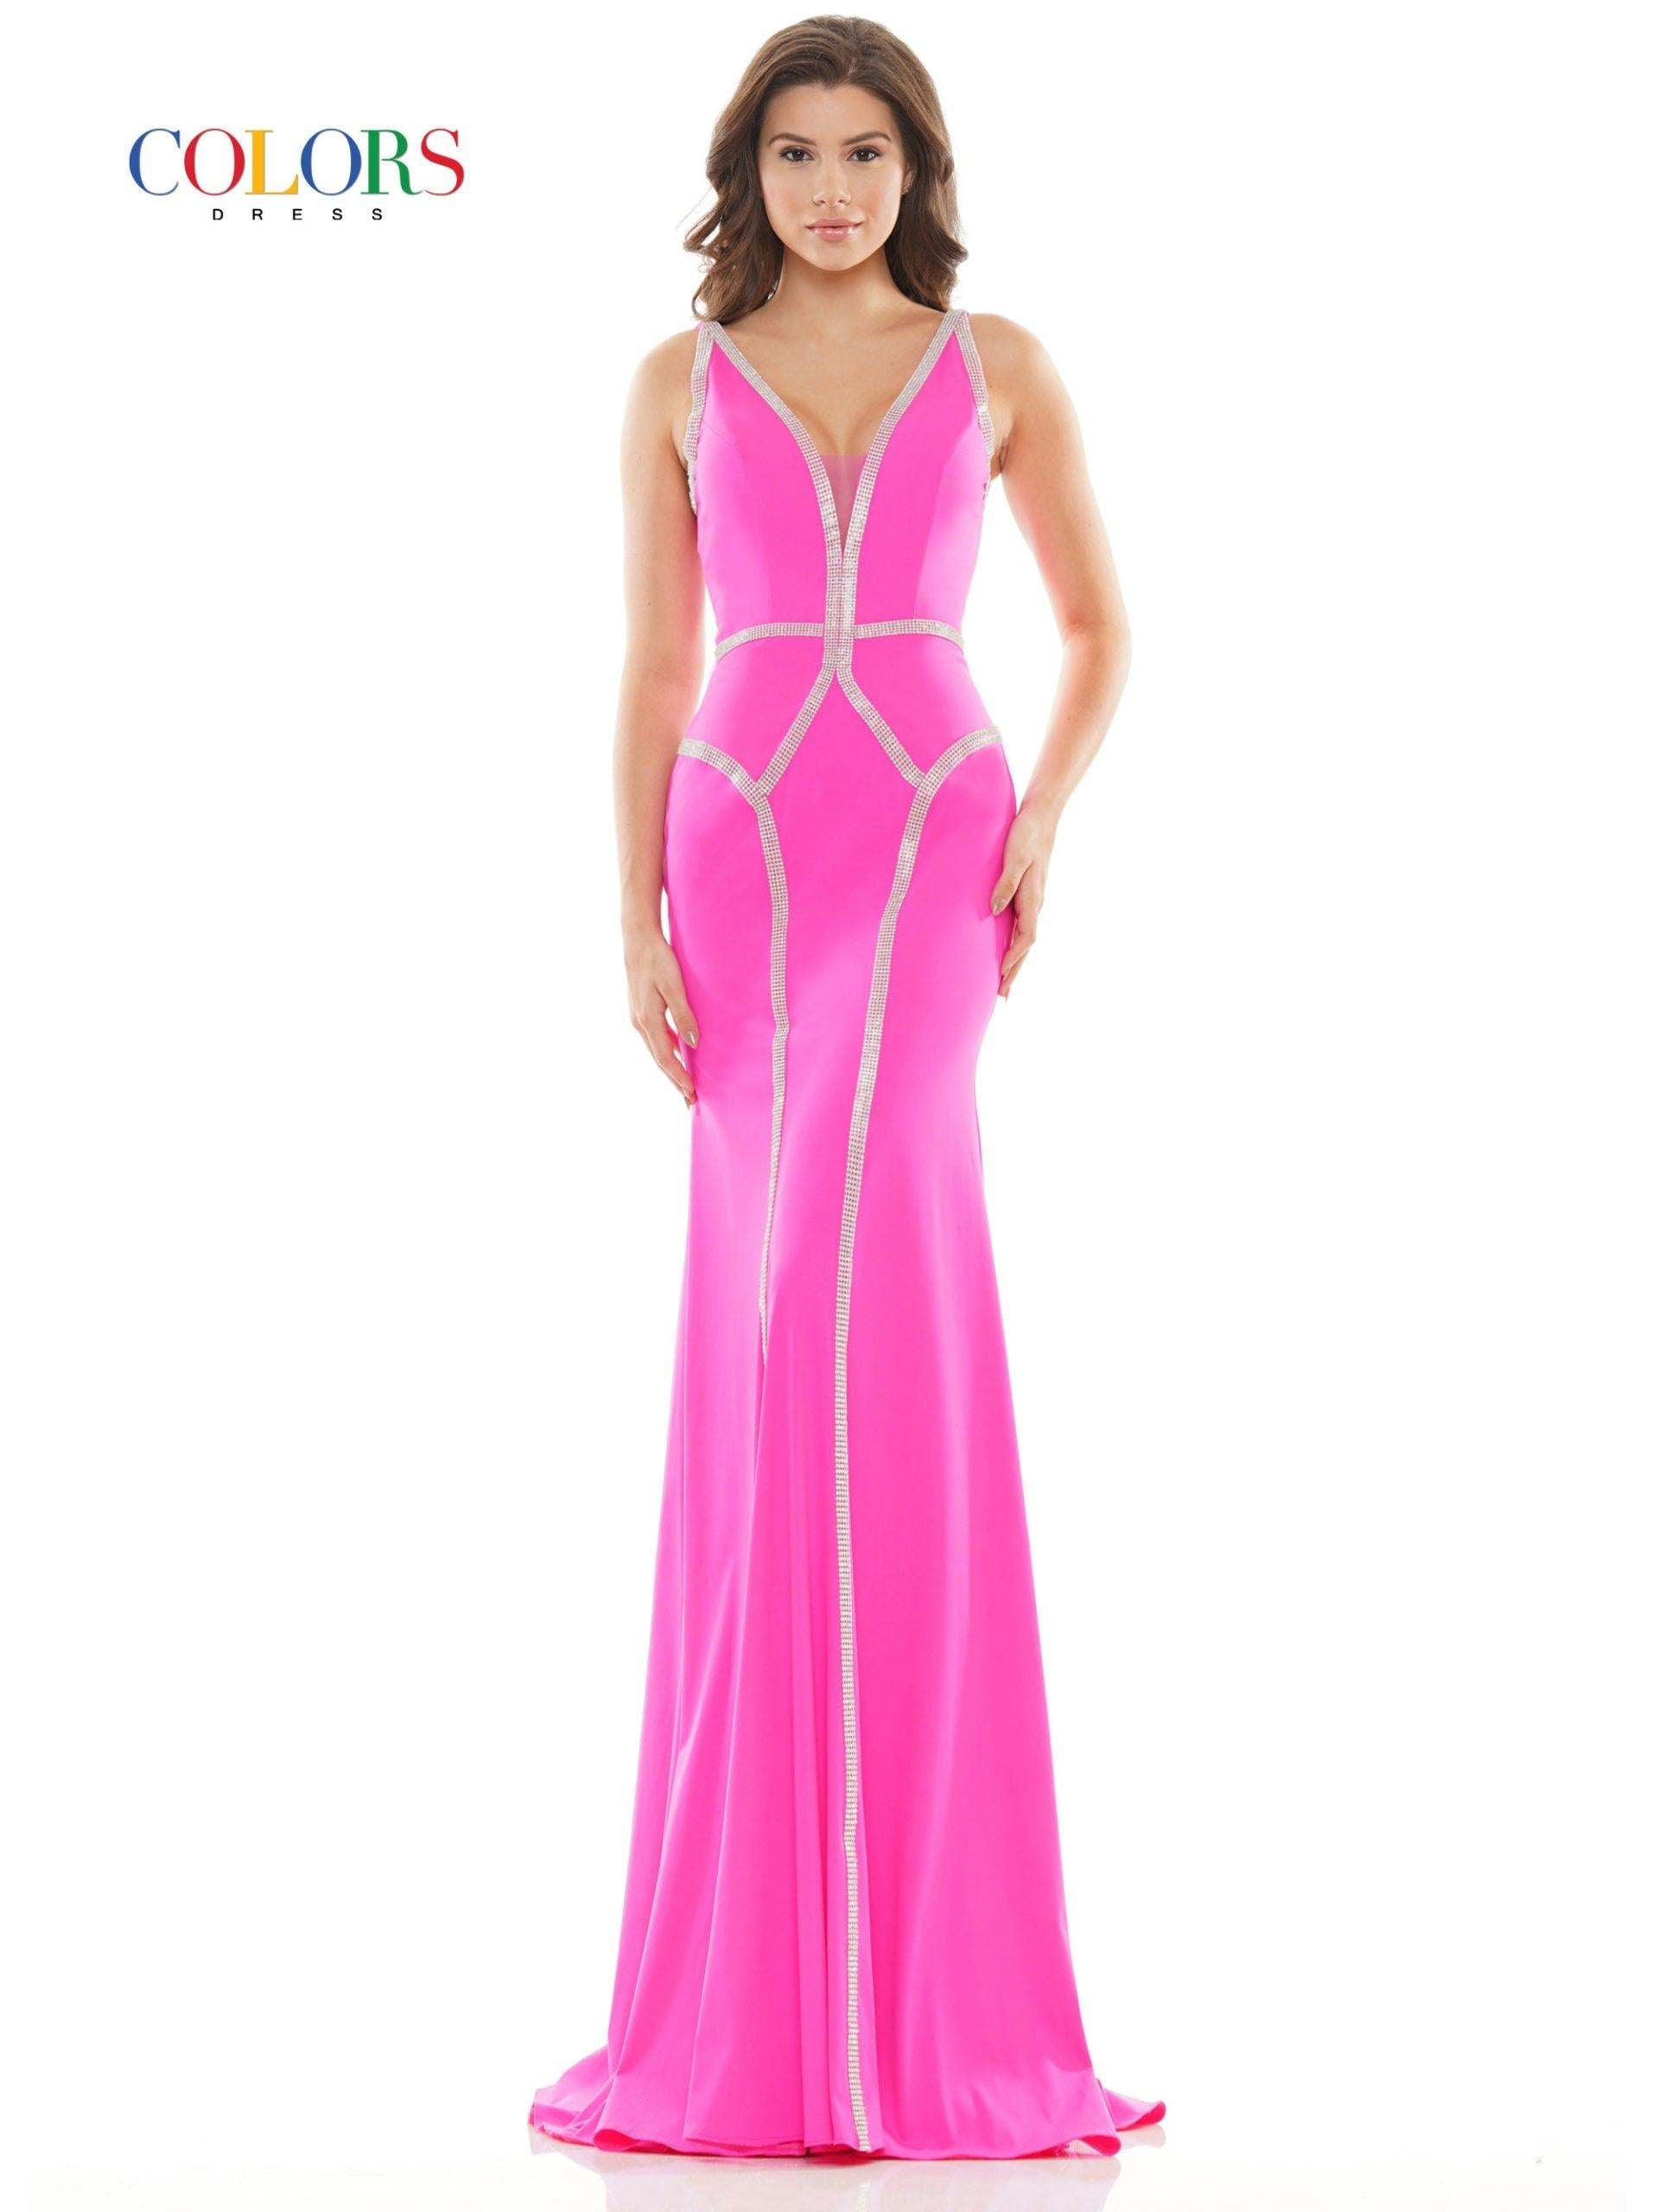 Colors Long Sleeveless Formal Beaded Dress 2696 - The Dress Outlet